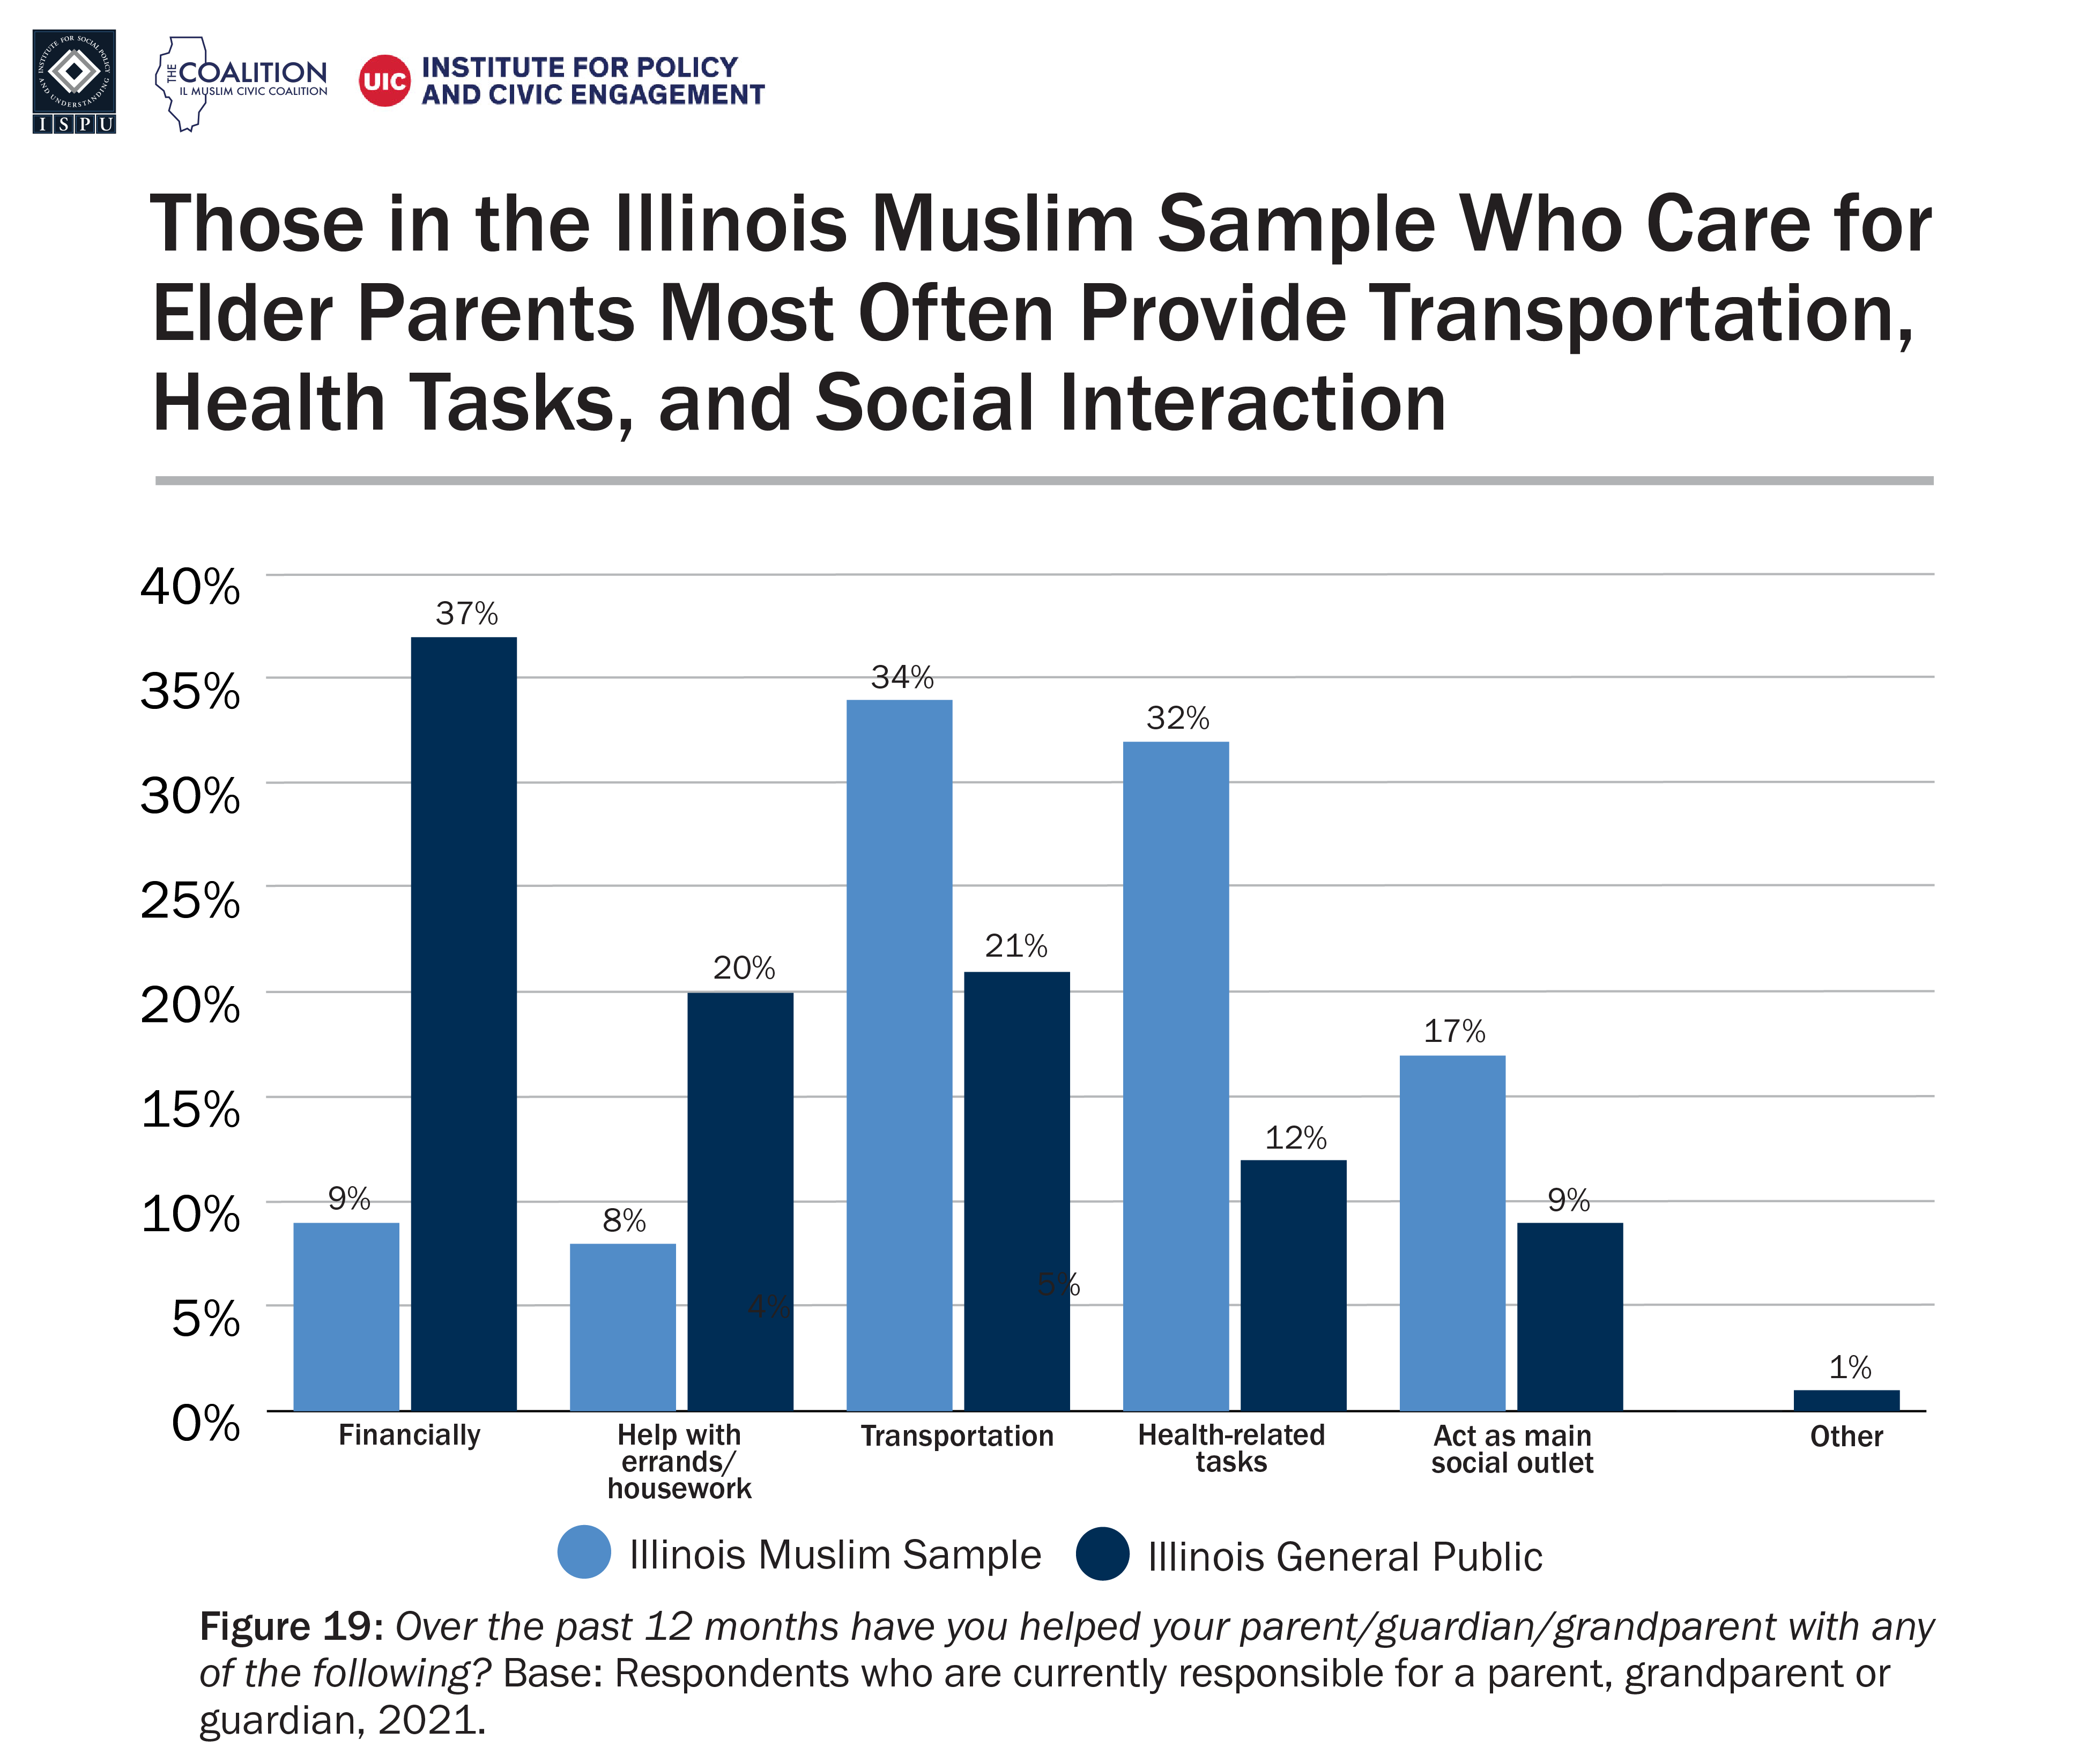 A bar graph showing the proportion of the Illinois Muslim sample and Illinois general public who help a parent or grandparent with various tasks